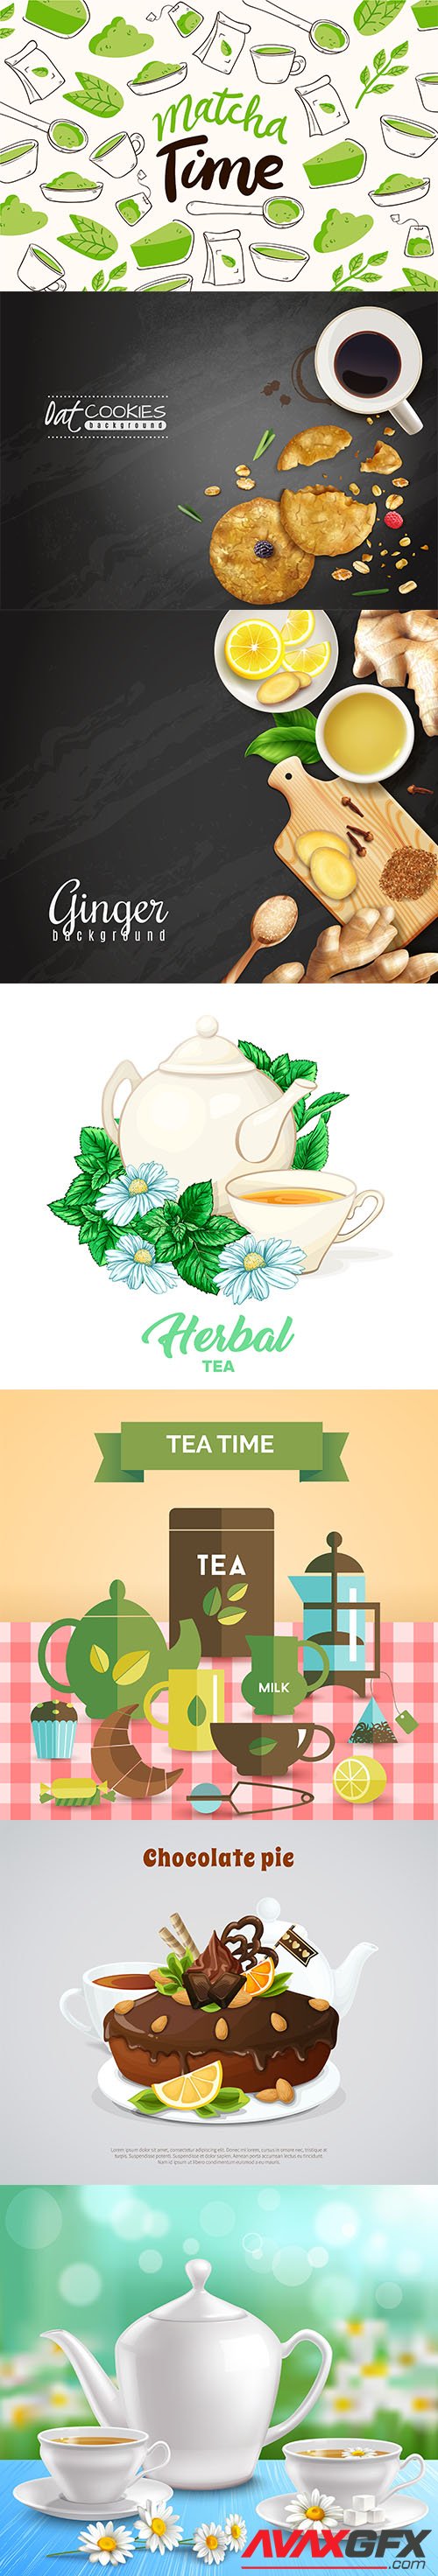 Tea time background collection